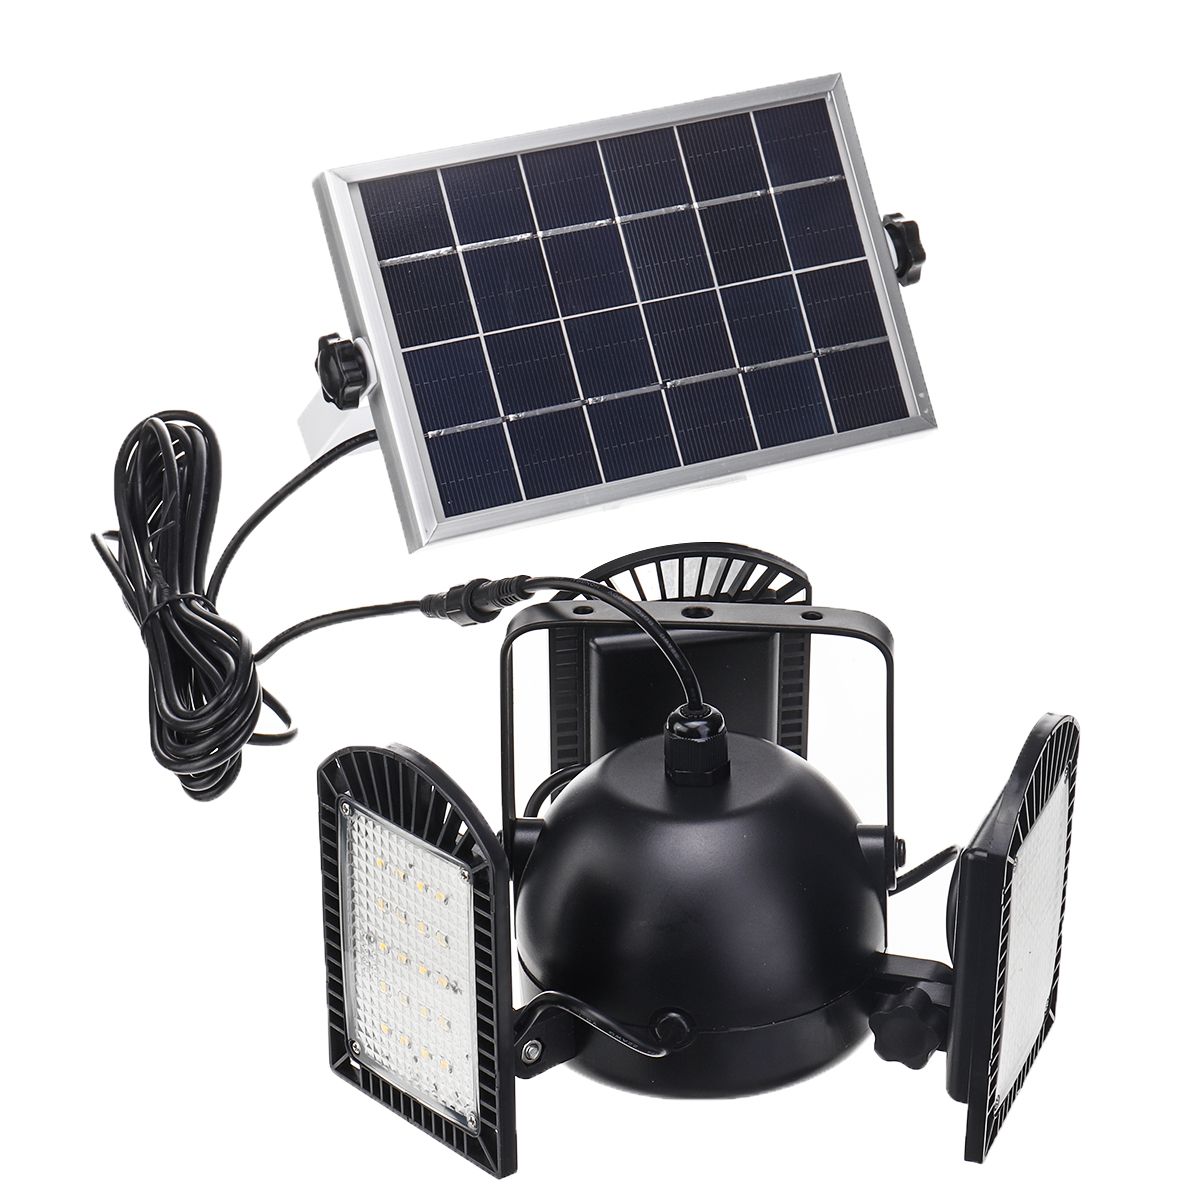 60-LEDs-Solar-Powered-Wall-Lights-Garden-Lamp-Outdoor-IP65-Waterproof-Automatic-1720146